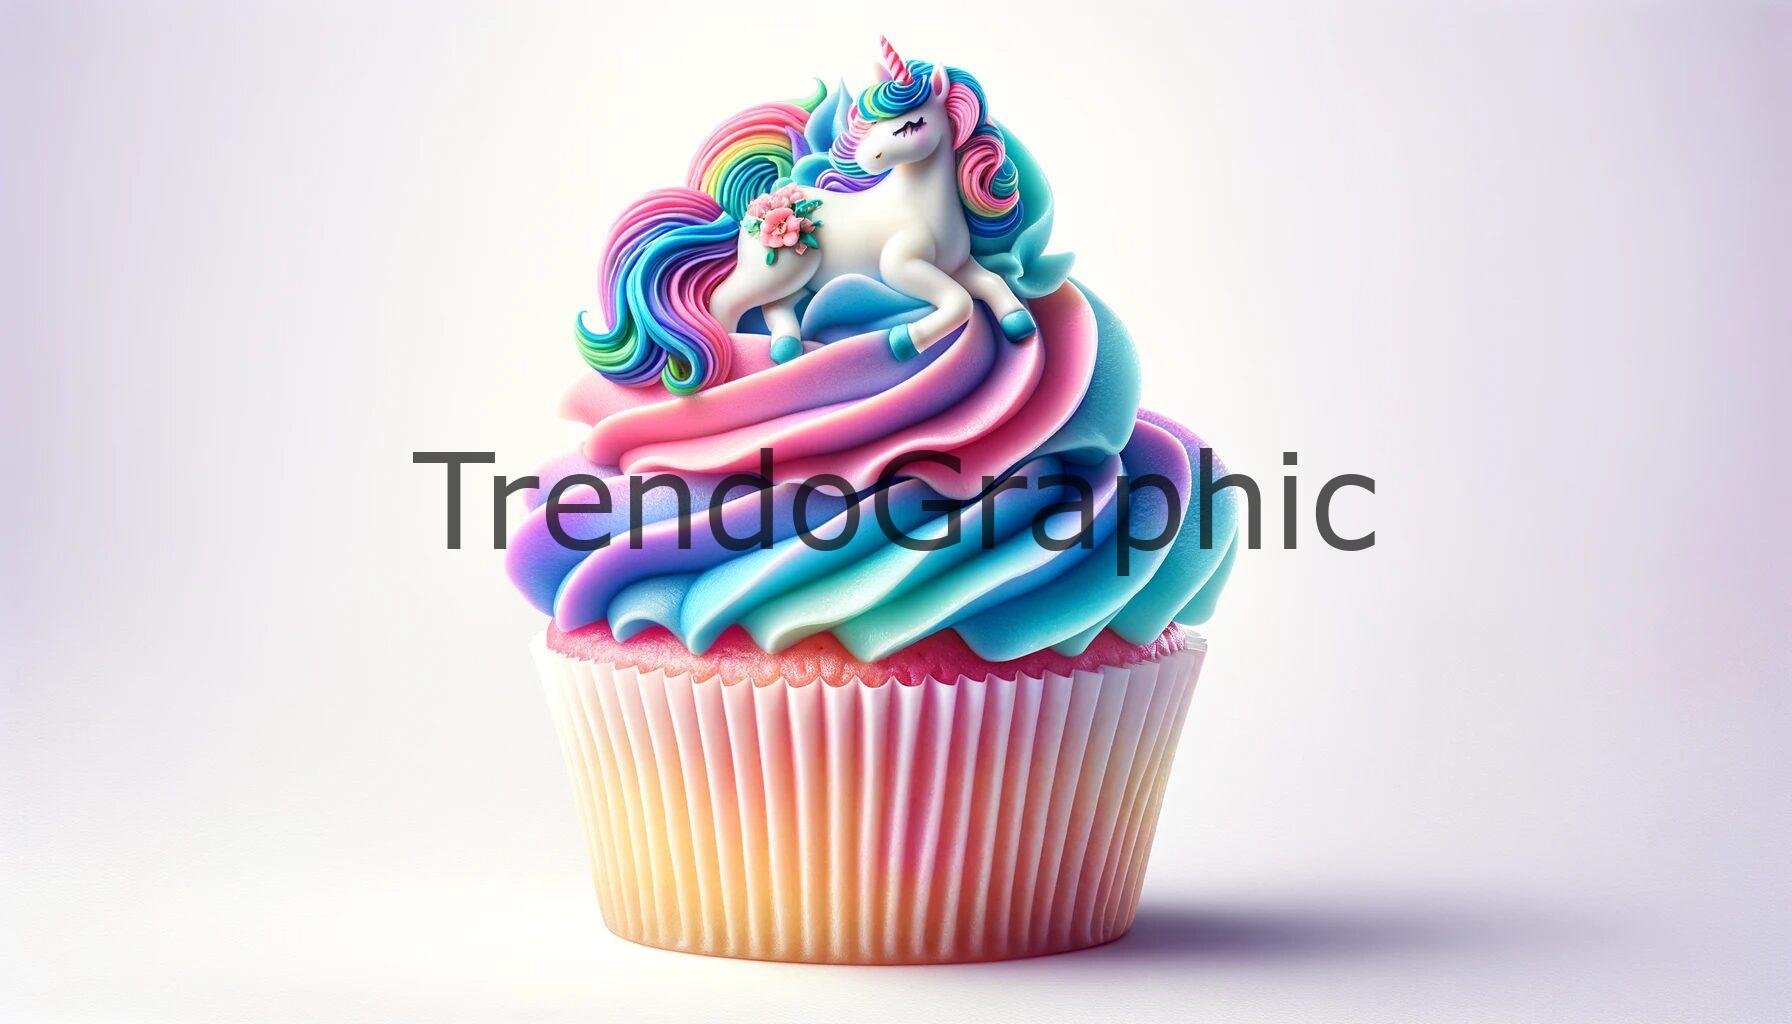 Unicorn-Themed Cupcake with Pastel Swirl Frosting